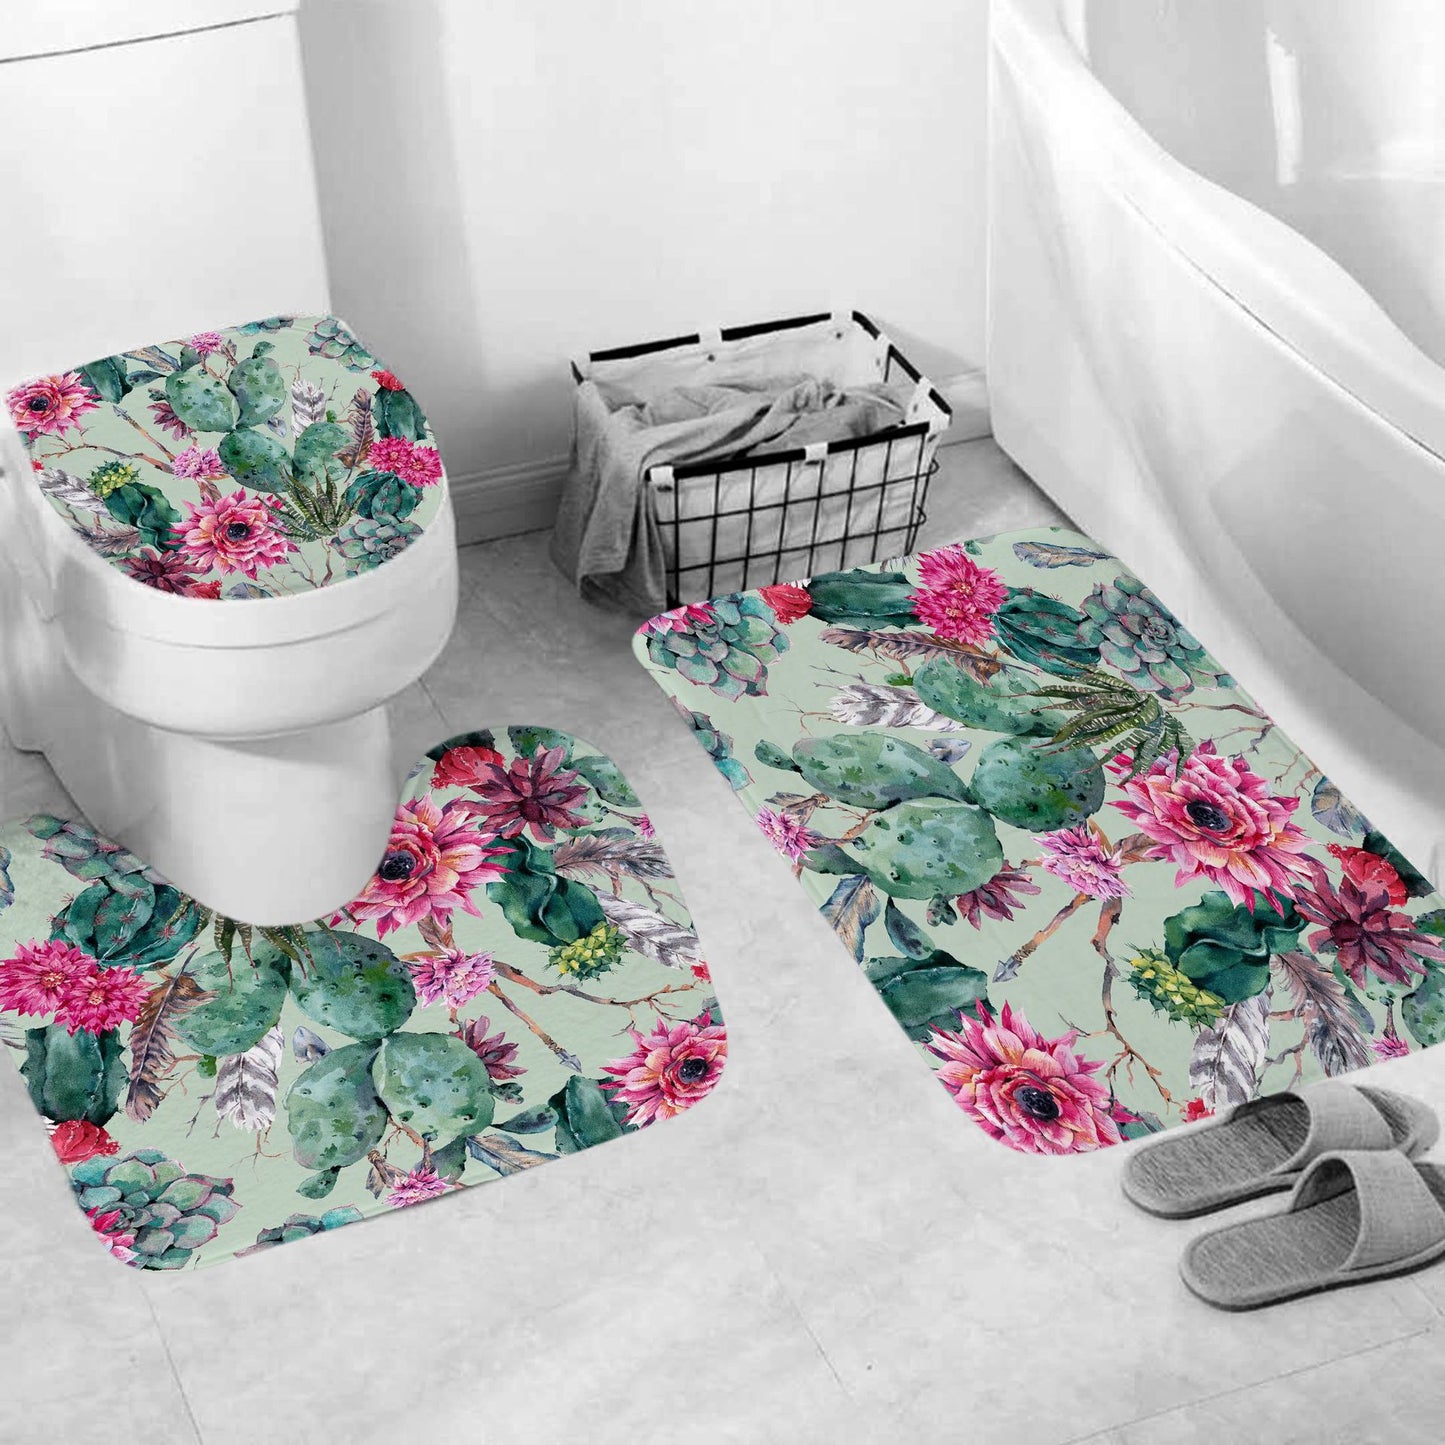 Cactus with Bloom Flower Painting Shower Curtain Set - 4 Pcs